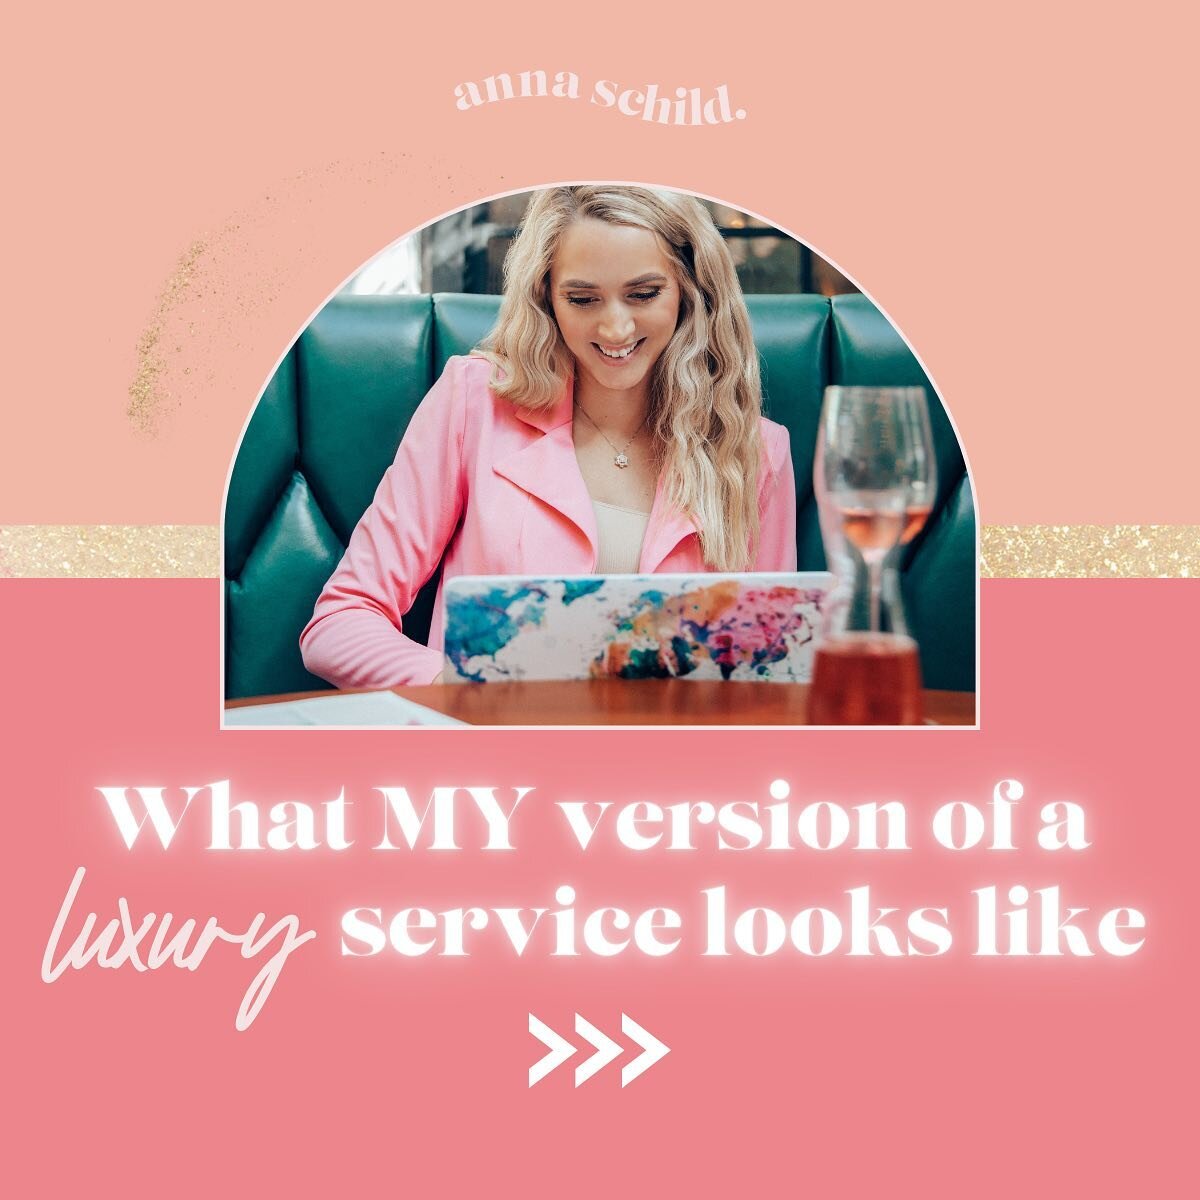 When it comes to delivering a VIP service, I pull out all the stops 🌟

Swipe for a delicious taster of what's in store when we work together, and holla at me when you're ready to say &quot;YES MAM&quot; to this magical new partnership together. You 